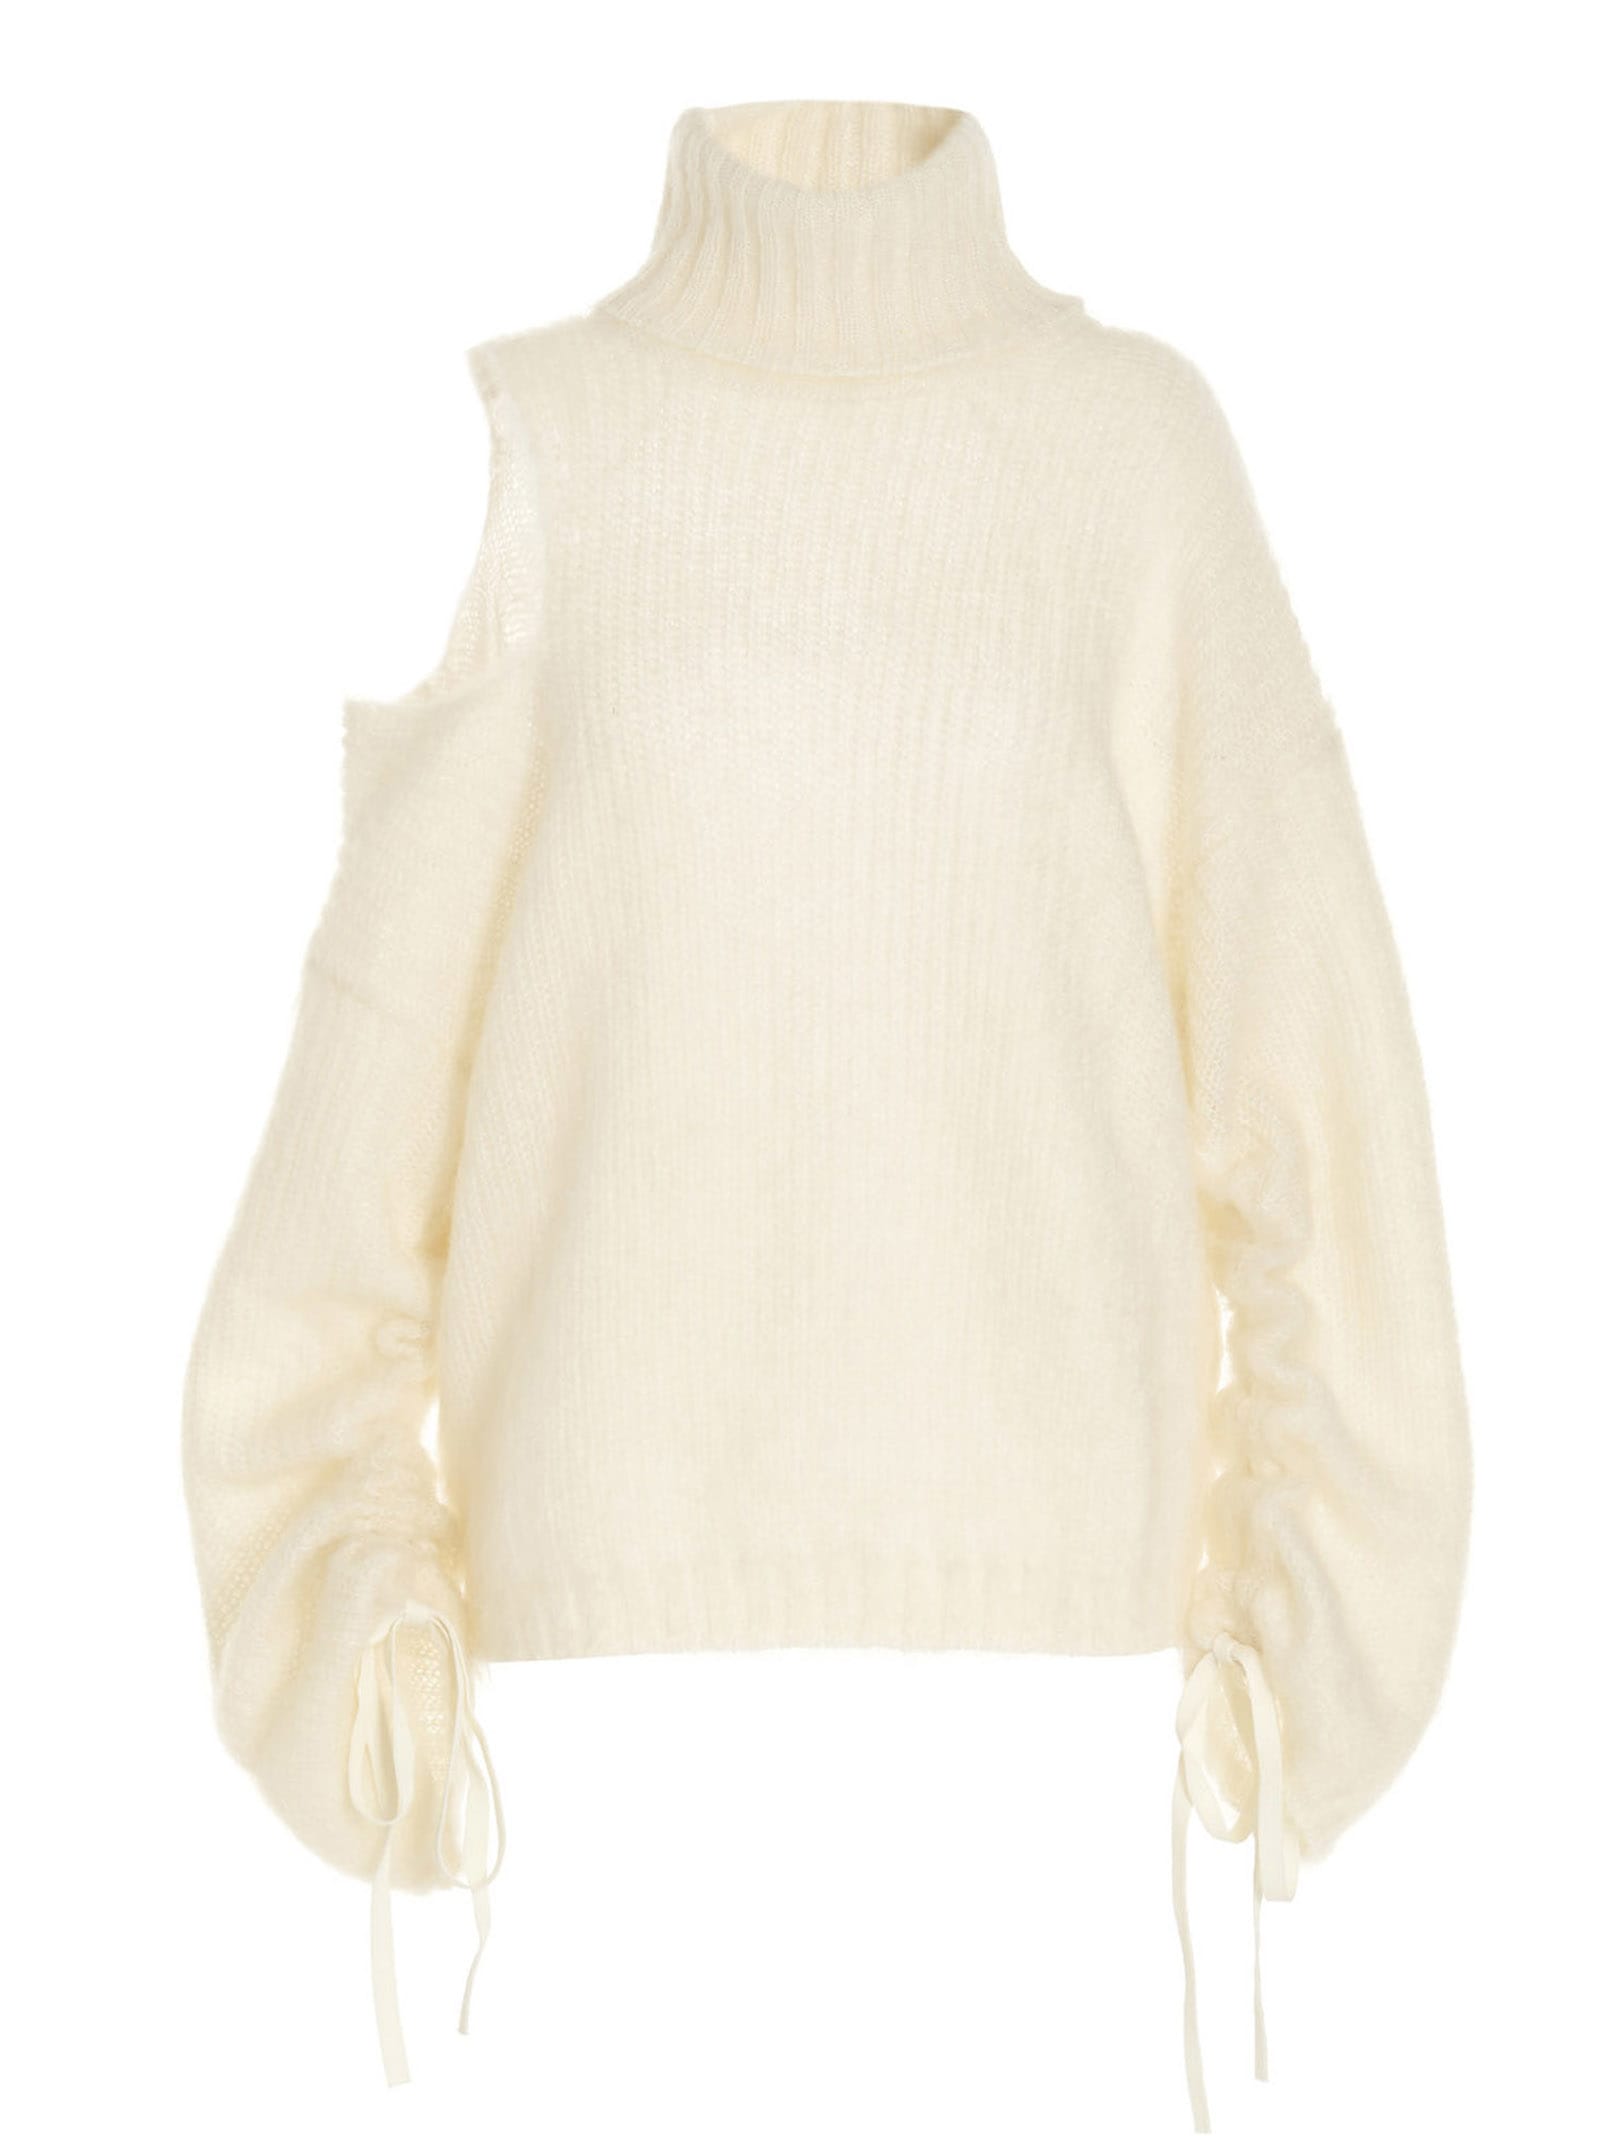 ANDREADAMO Cut Out Lacing Sweater